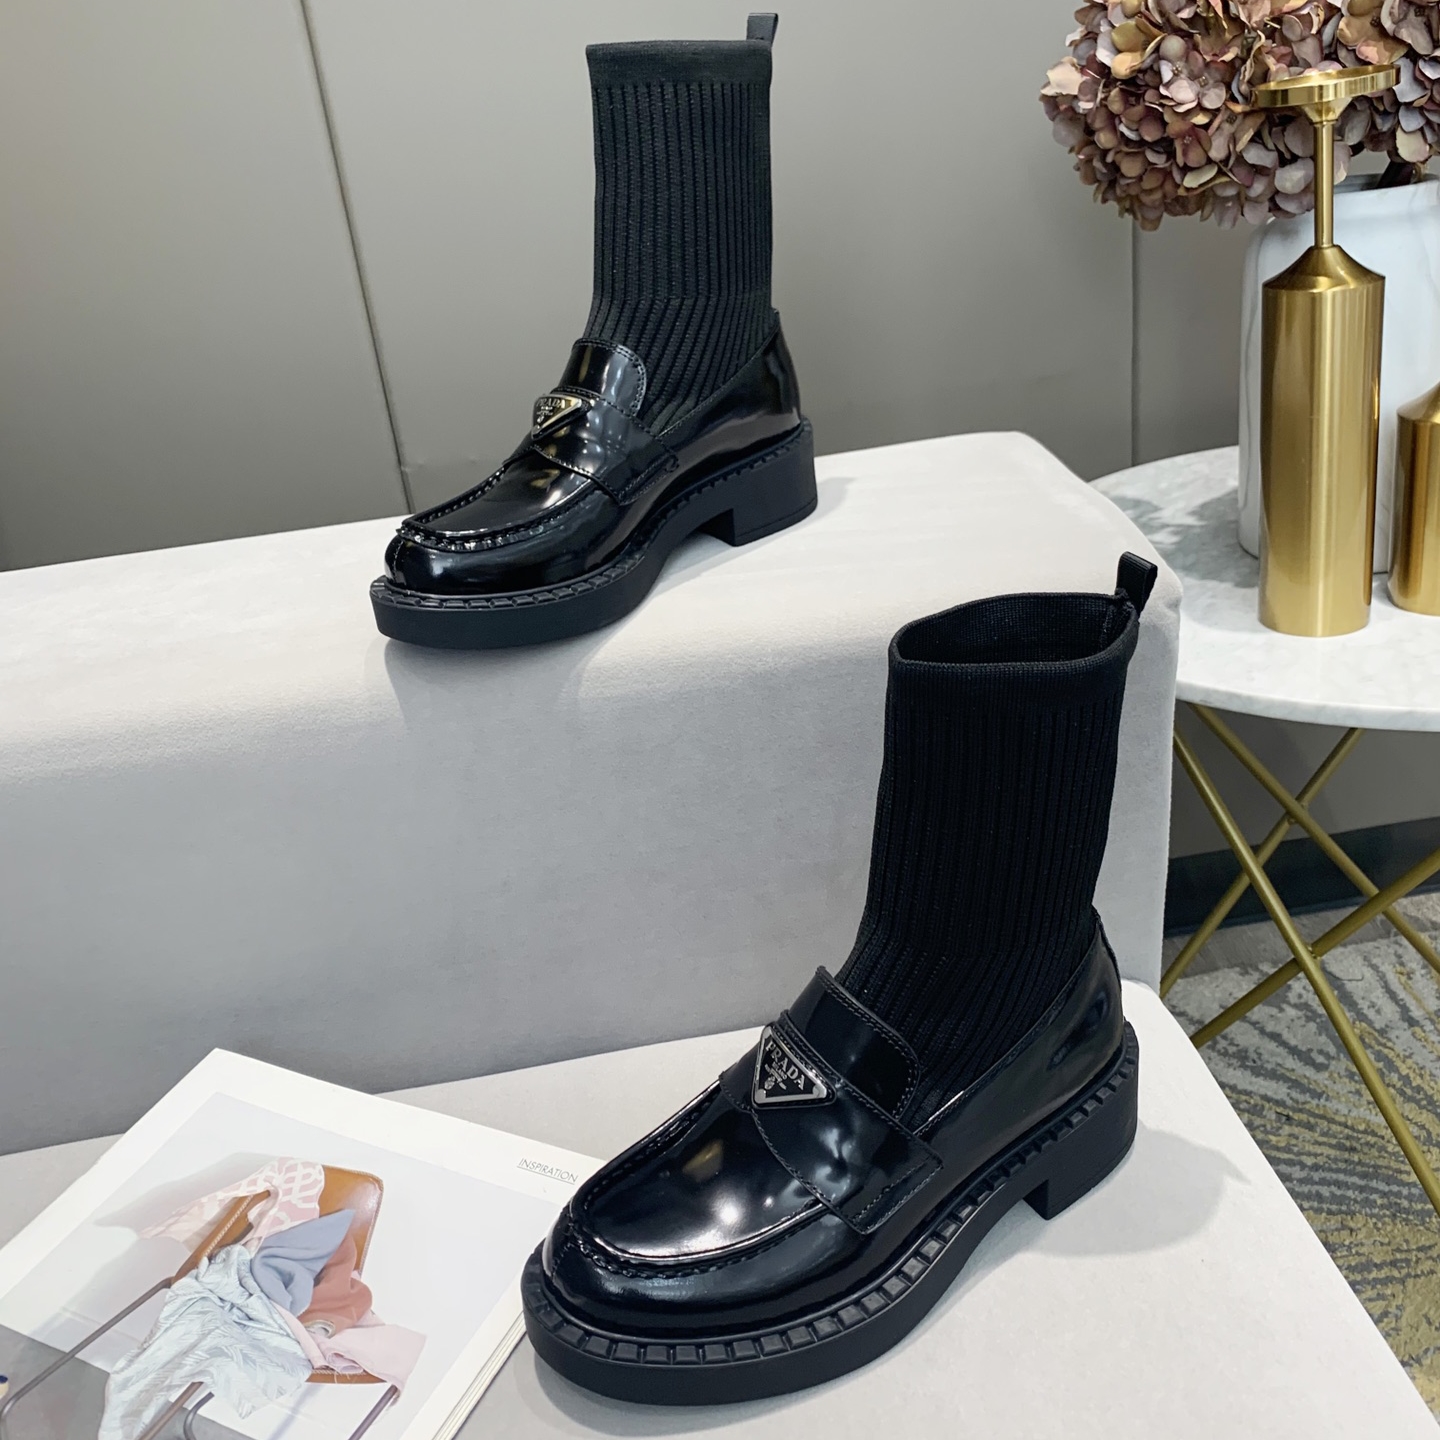 Good selling sock Boots CalvinLuo fashion luxury famous brand Milan Fashion Week women brand shoes and fake designers shoes also high quality brand heels